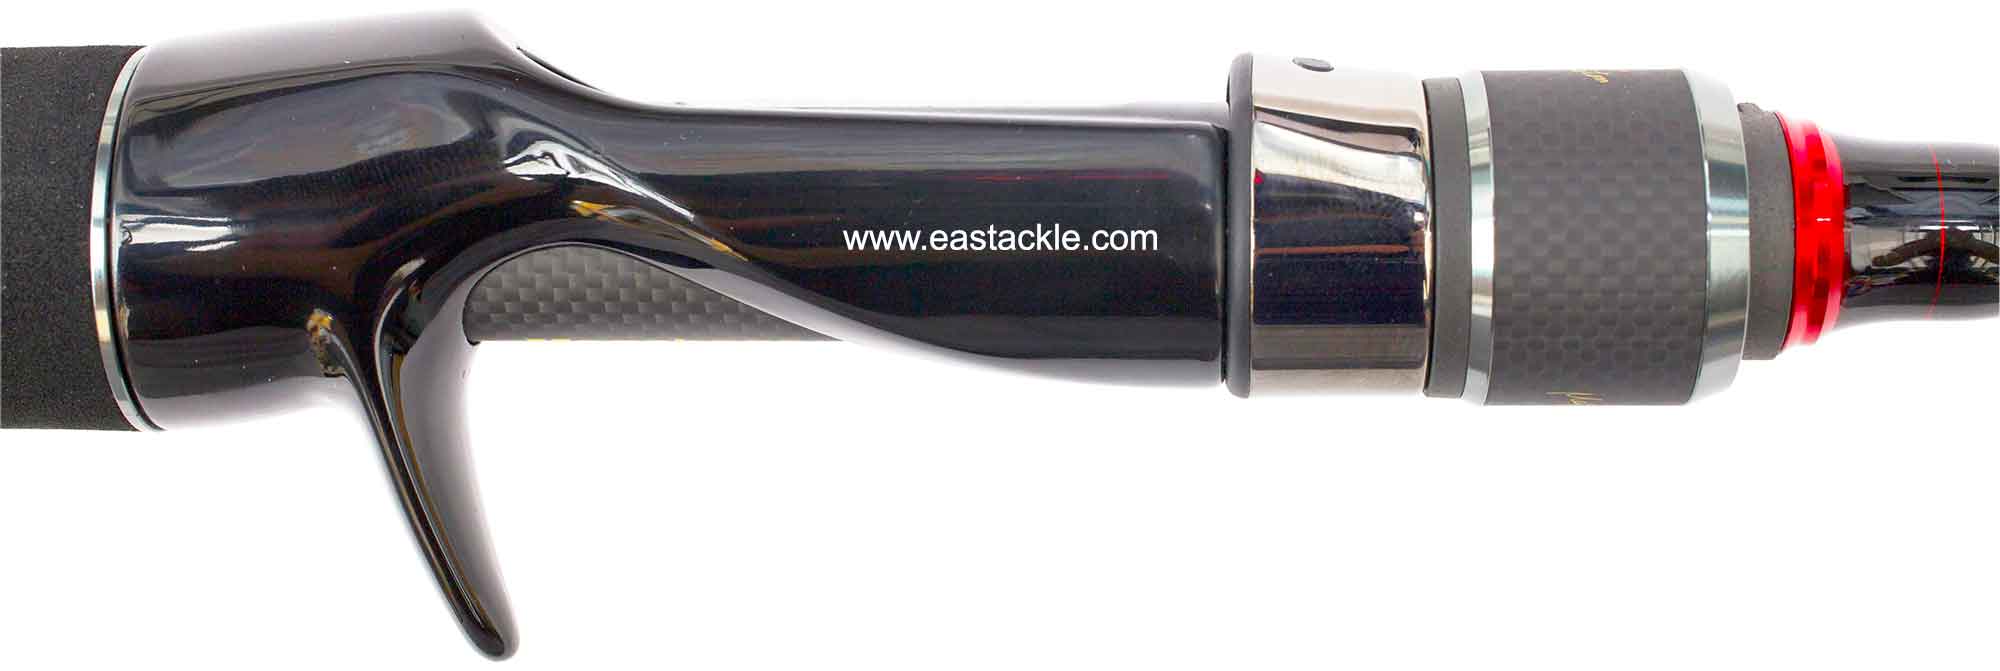 Megabass - Racing Condition World Edition - RCC-702MH - Bait Casting Rod - Reel Seat (Side View)